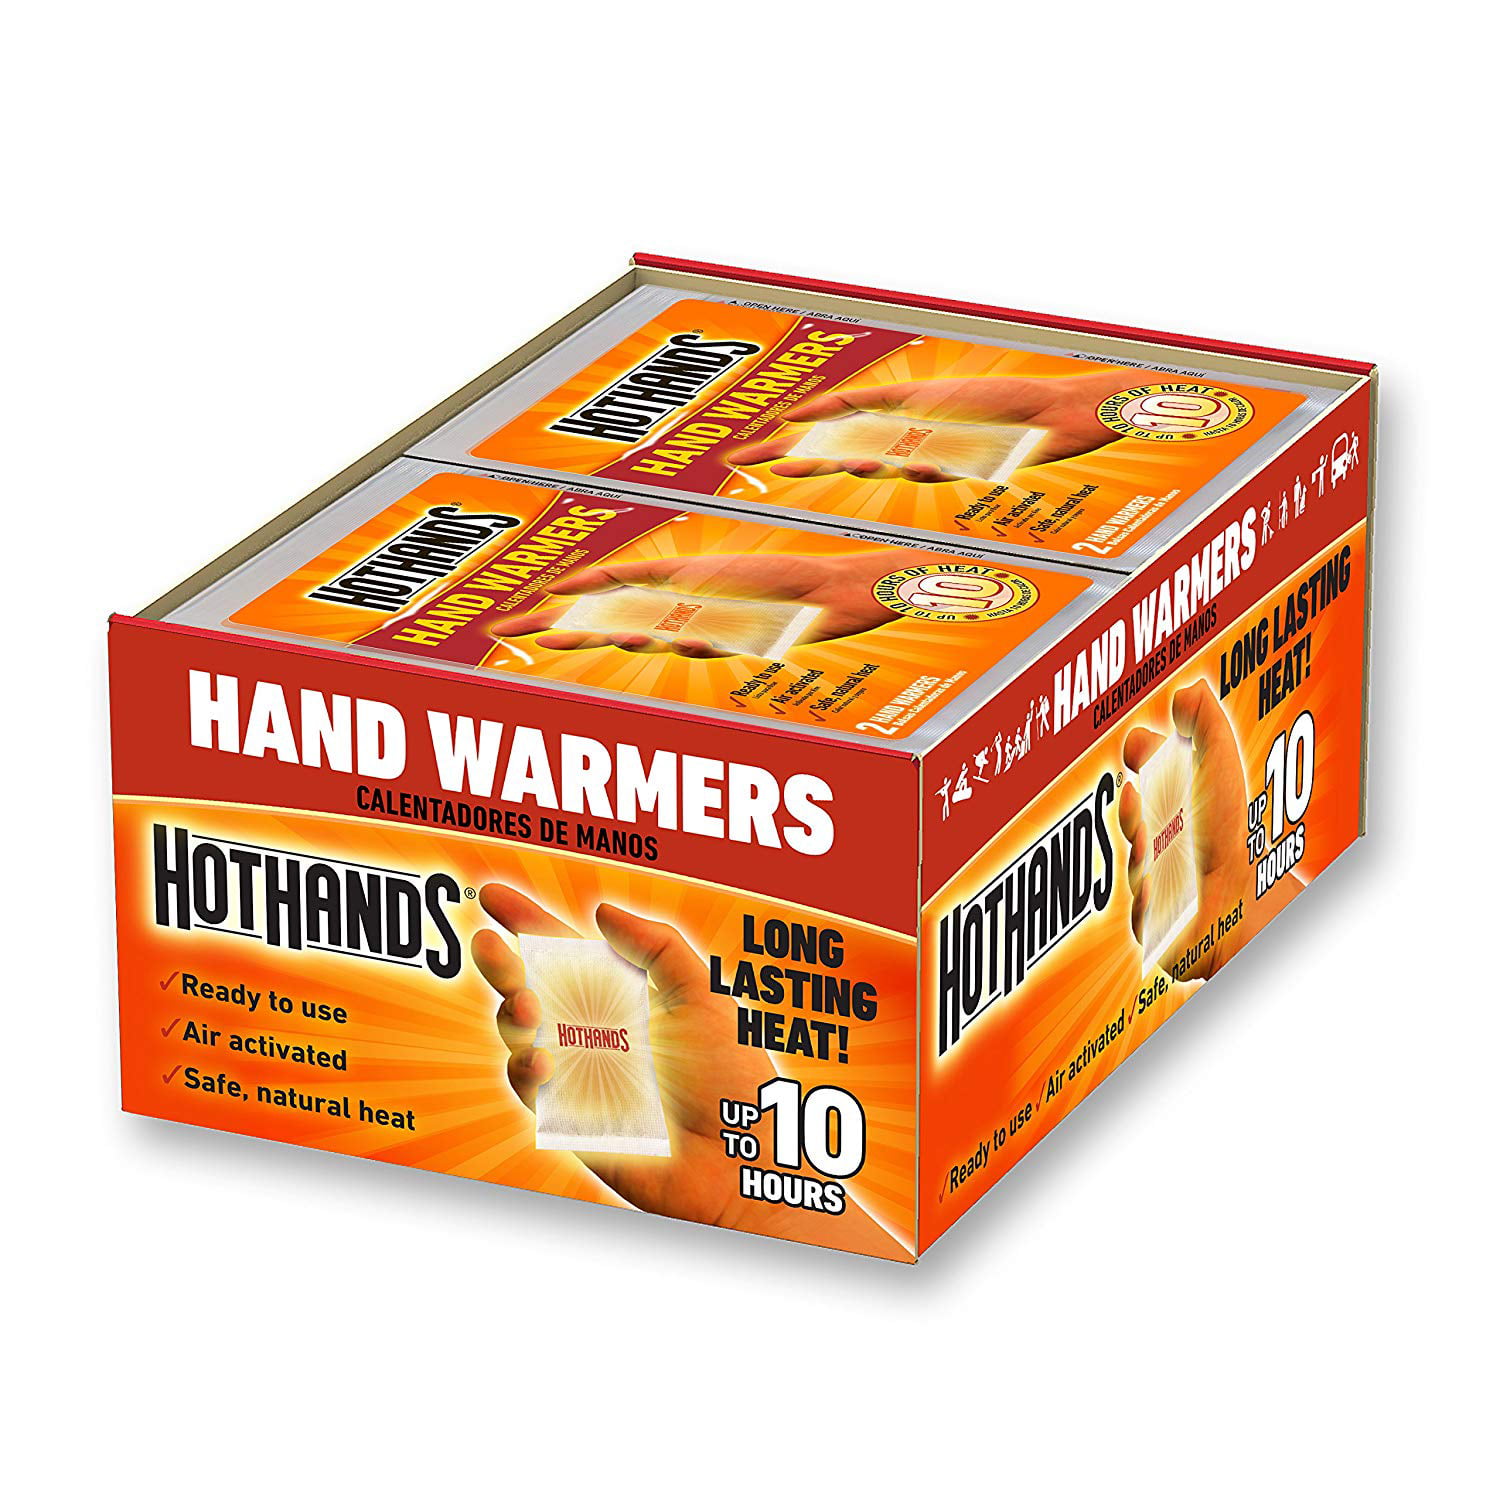 2 PAIRS OF HOTHANDS HAND WARMERS UP TO 10 HOURS OF HEAT PER PAIR ready to use 